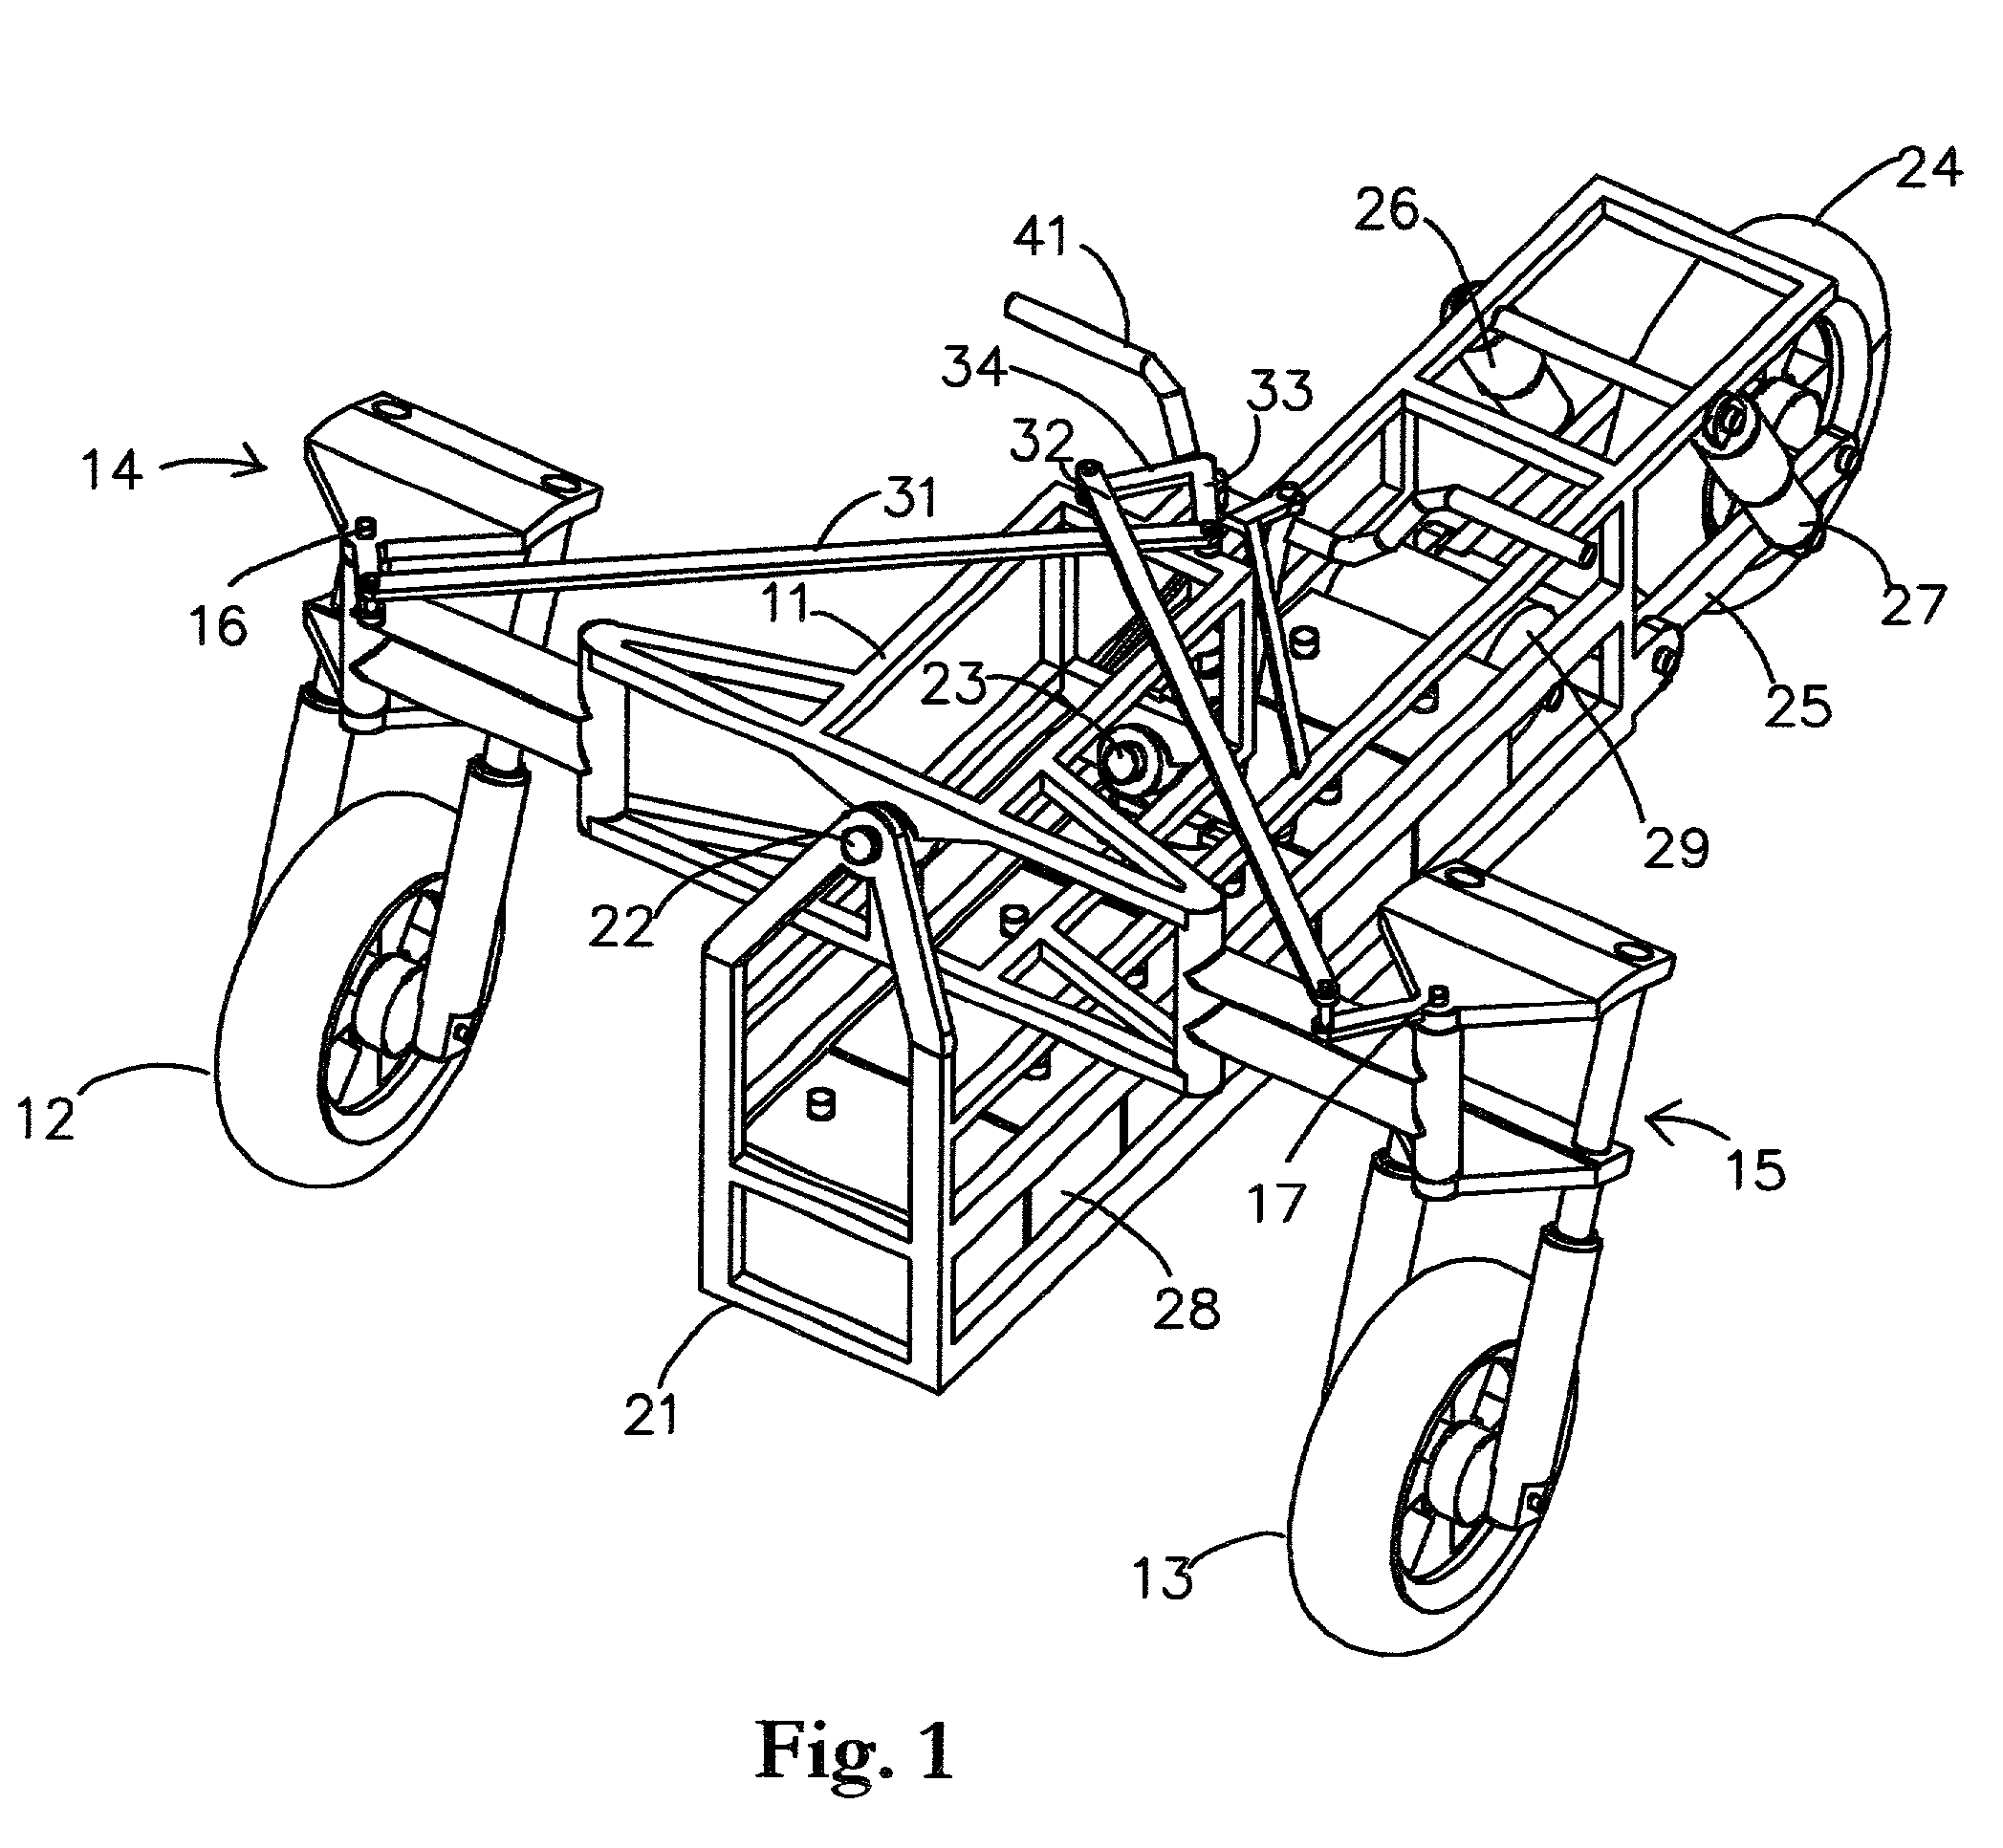 Vehicle with a stabilized tilting section